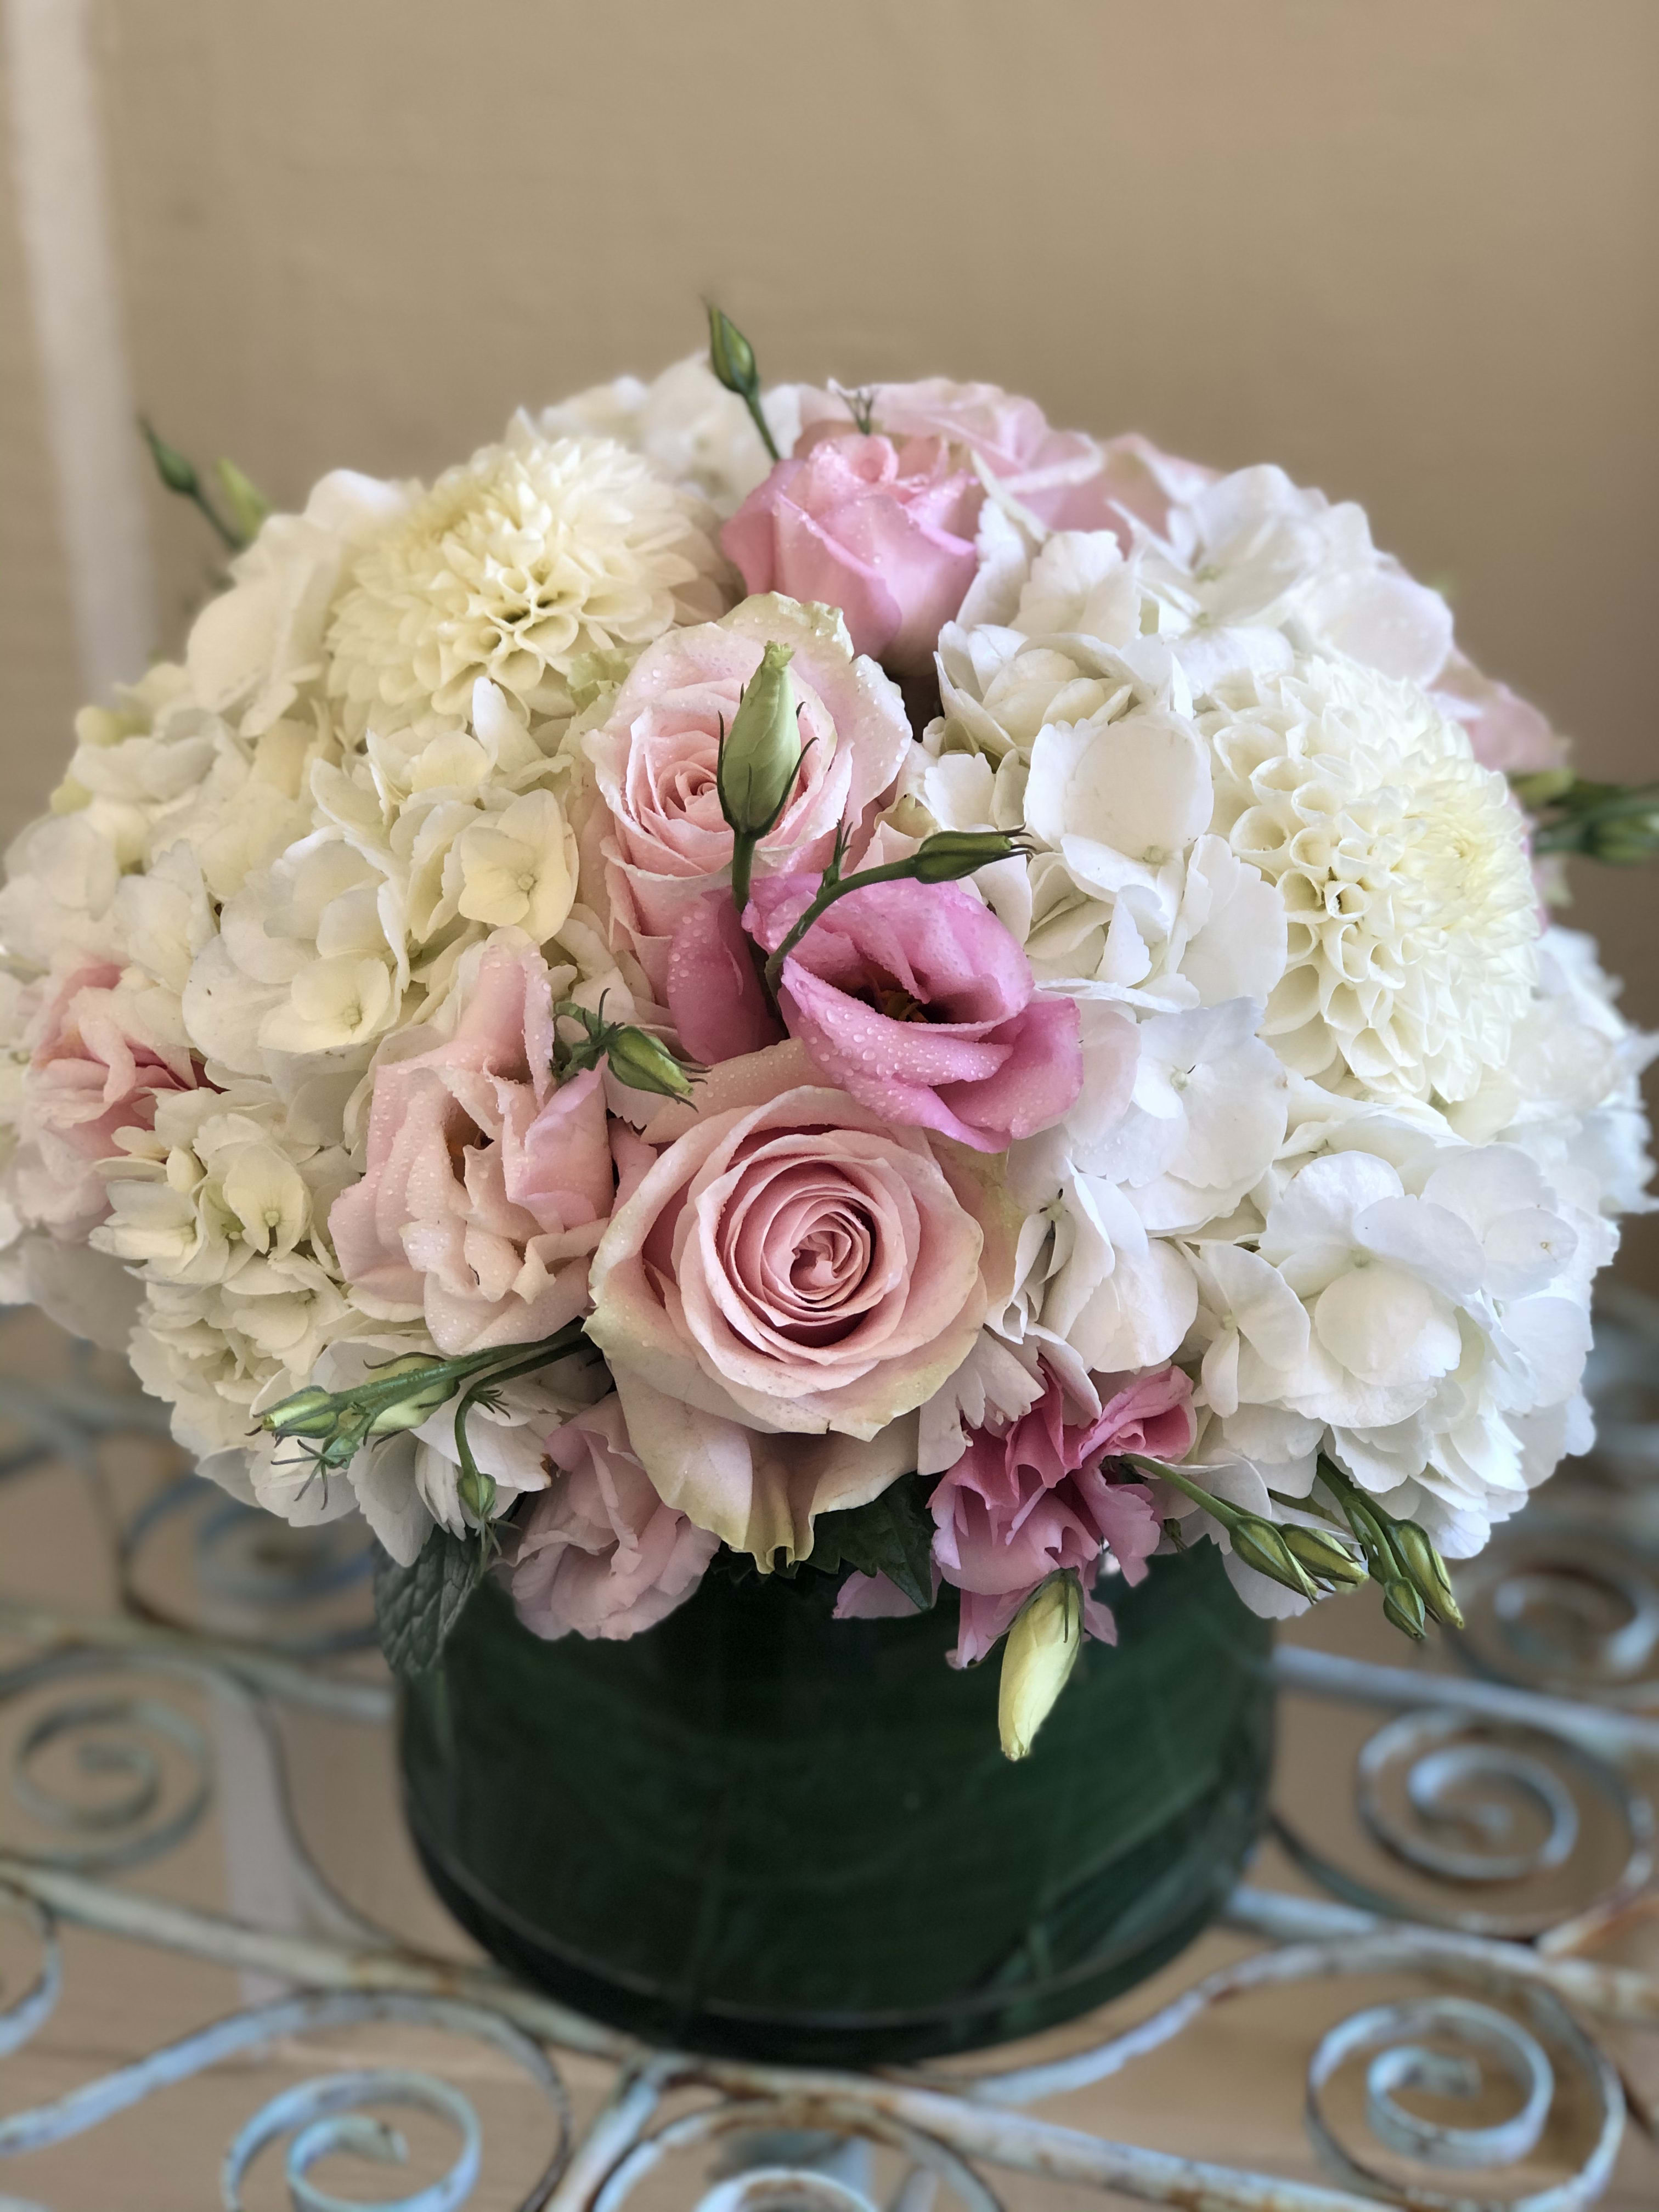 Blush - A beautiful low &amp; compact arrangement with white Hydrangeas, light pink Roses, white Lisianthus other elegant flowers and greens based on seasonal availability. Flower variety is subject to change based on seasonal availability. Containers subject to change based on budget and availability. However we will create something very similar. 